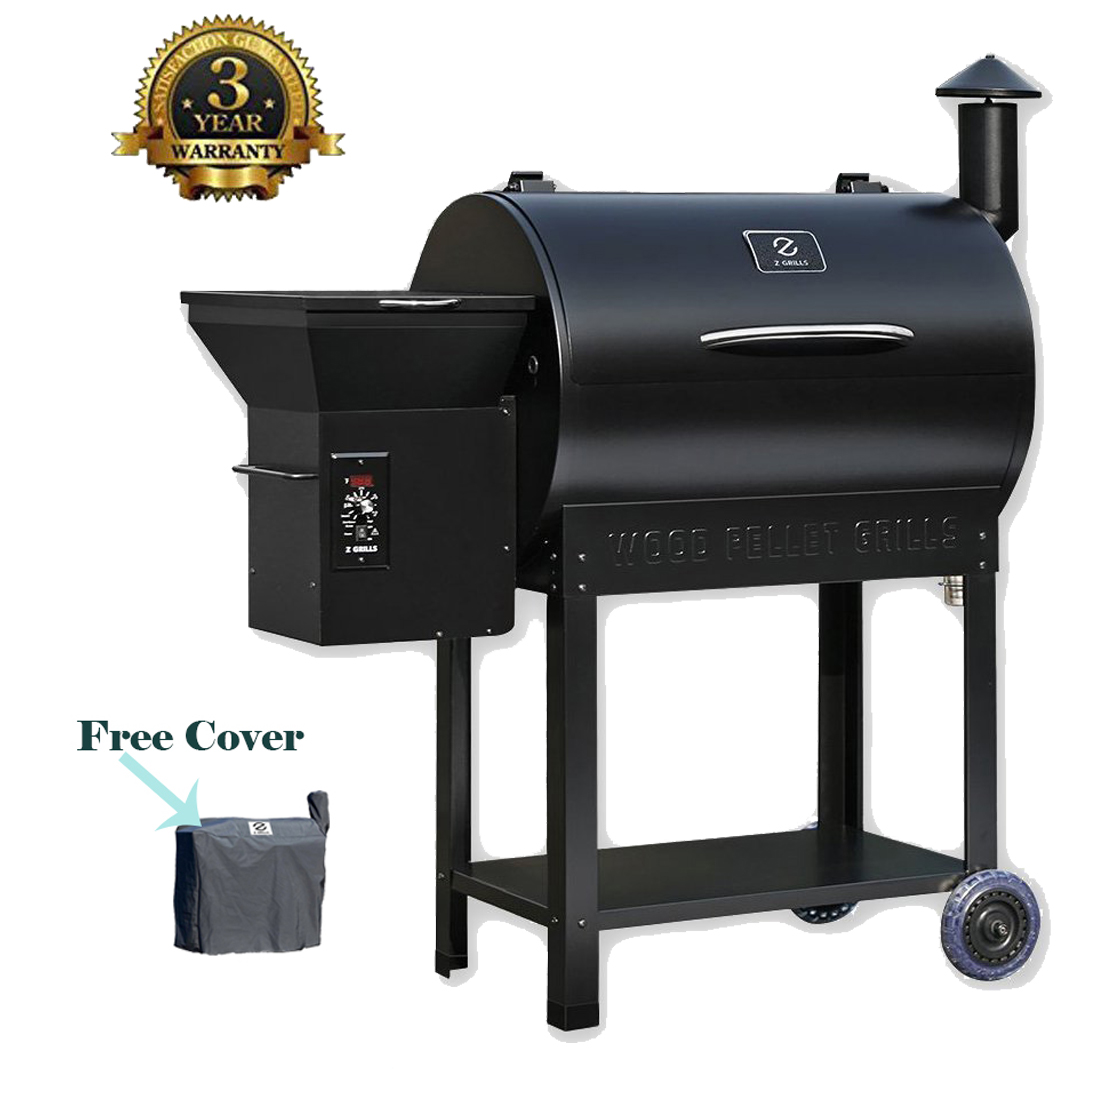 Z GRILLS 7002B Smart Wood Pellet Grill 8 in 1 Outdoor BBQ Smoker 700 SQ Inches Cooking Area  Barbecue Grill Black - image 1 of 8